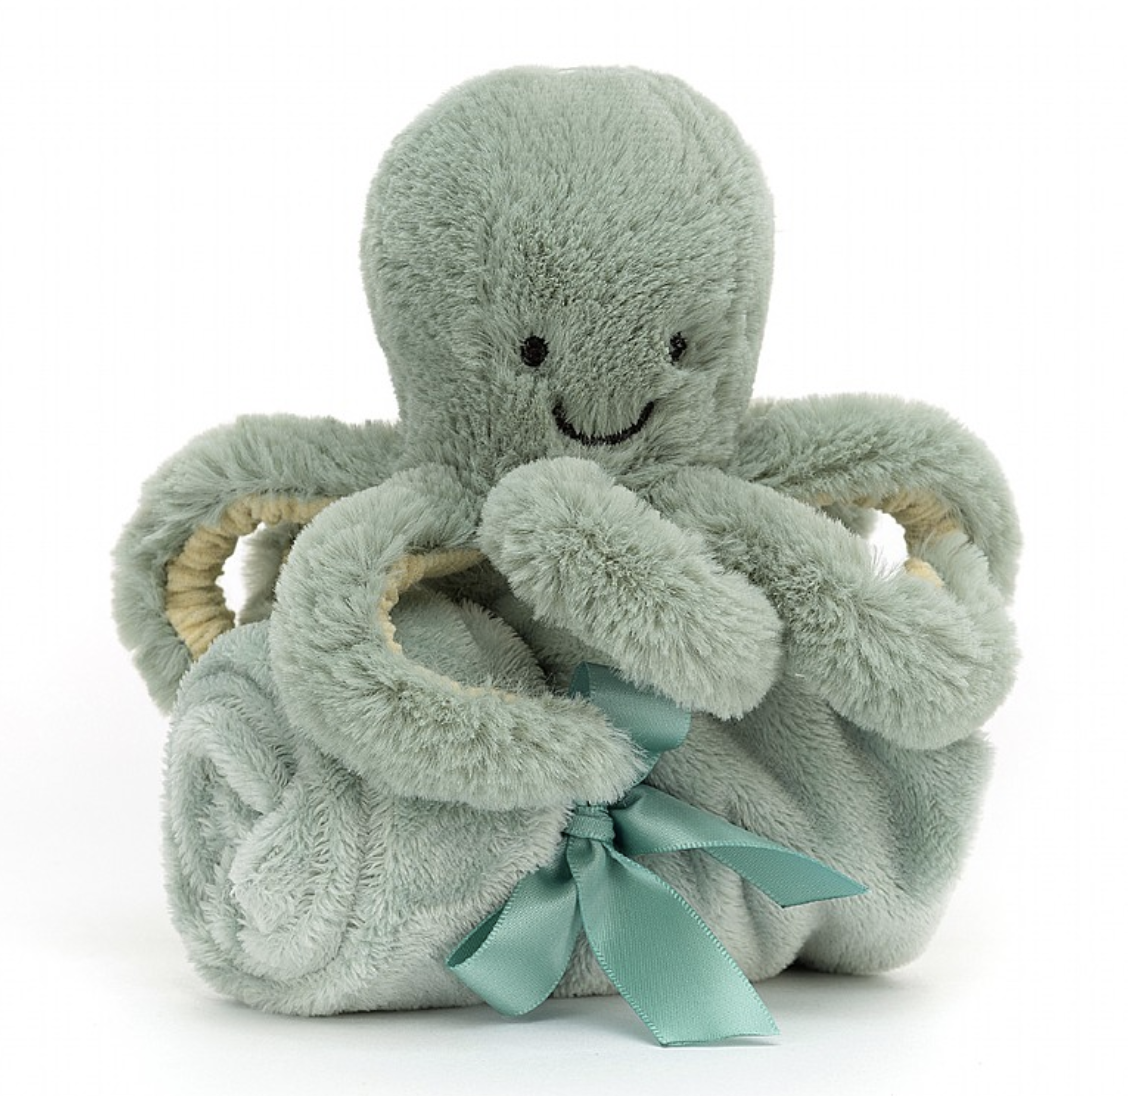 Jellycat jellycat marine soother